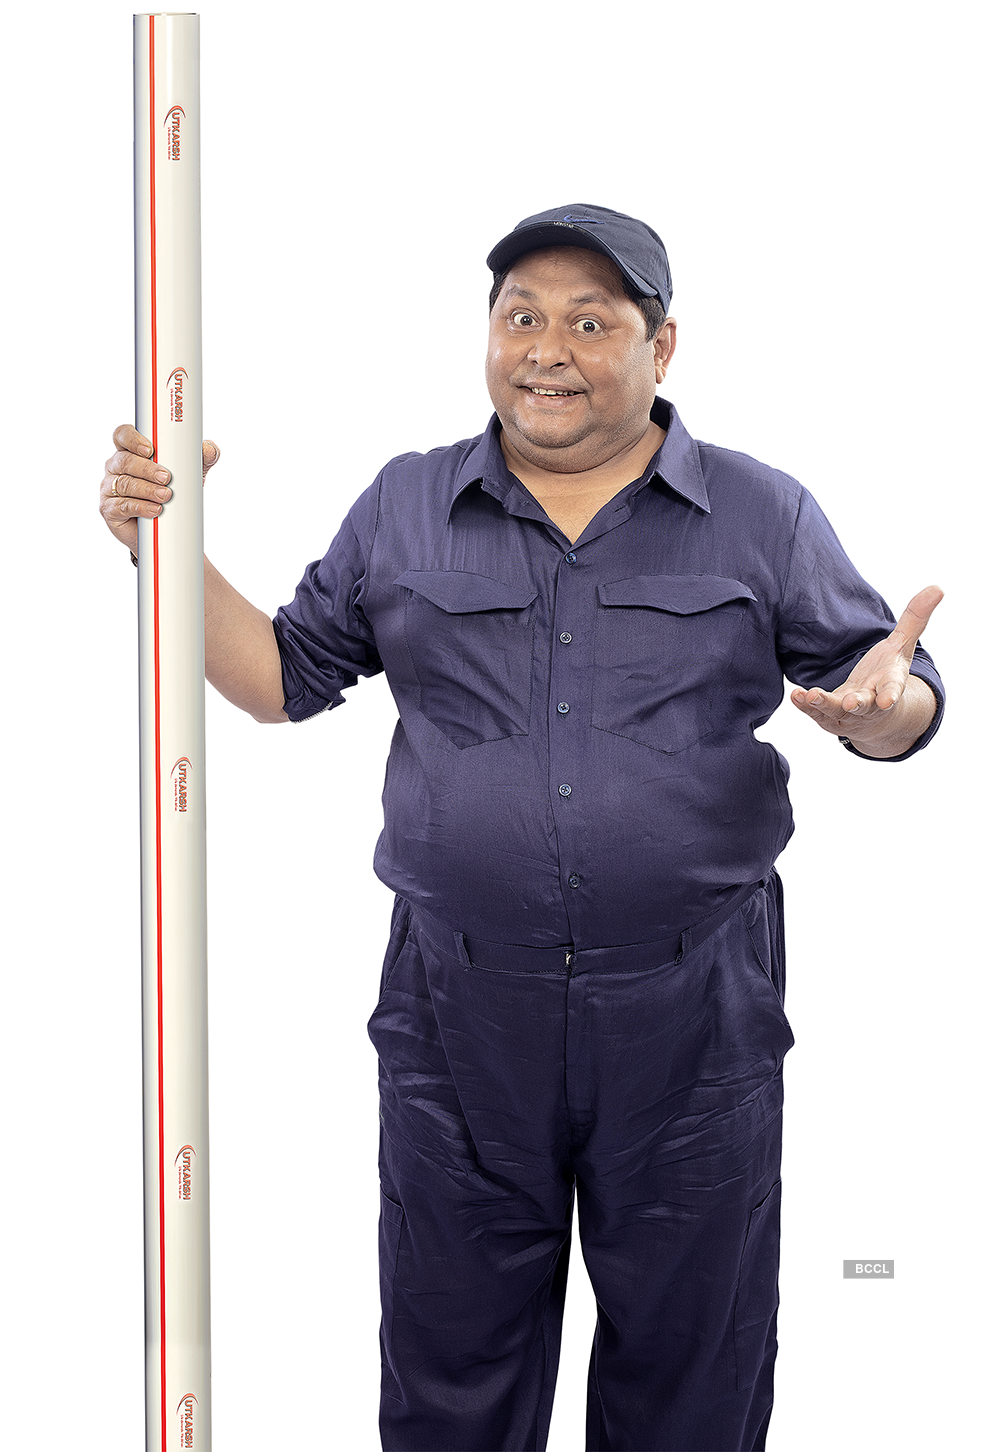 Pictures of noted Bengali Actor Kharaj Mukherjee in his new look as a plumber go viral